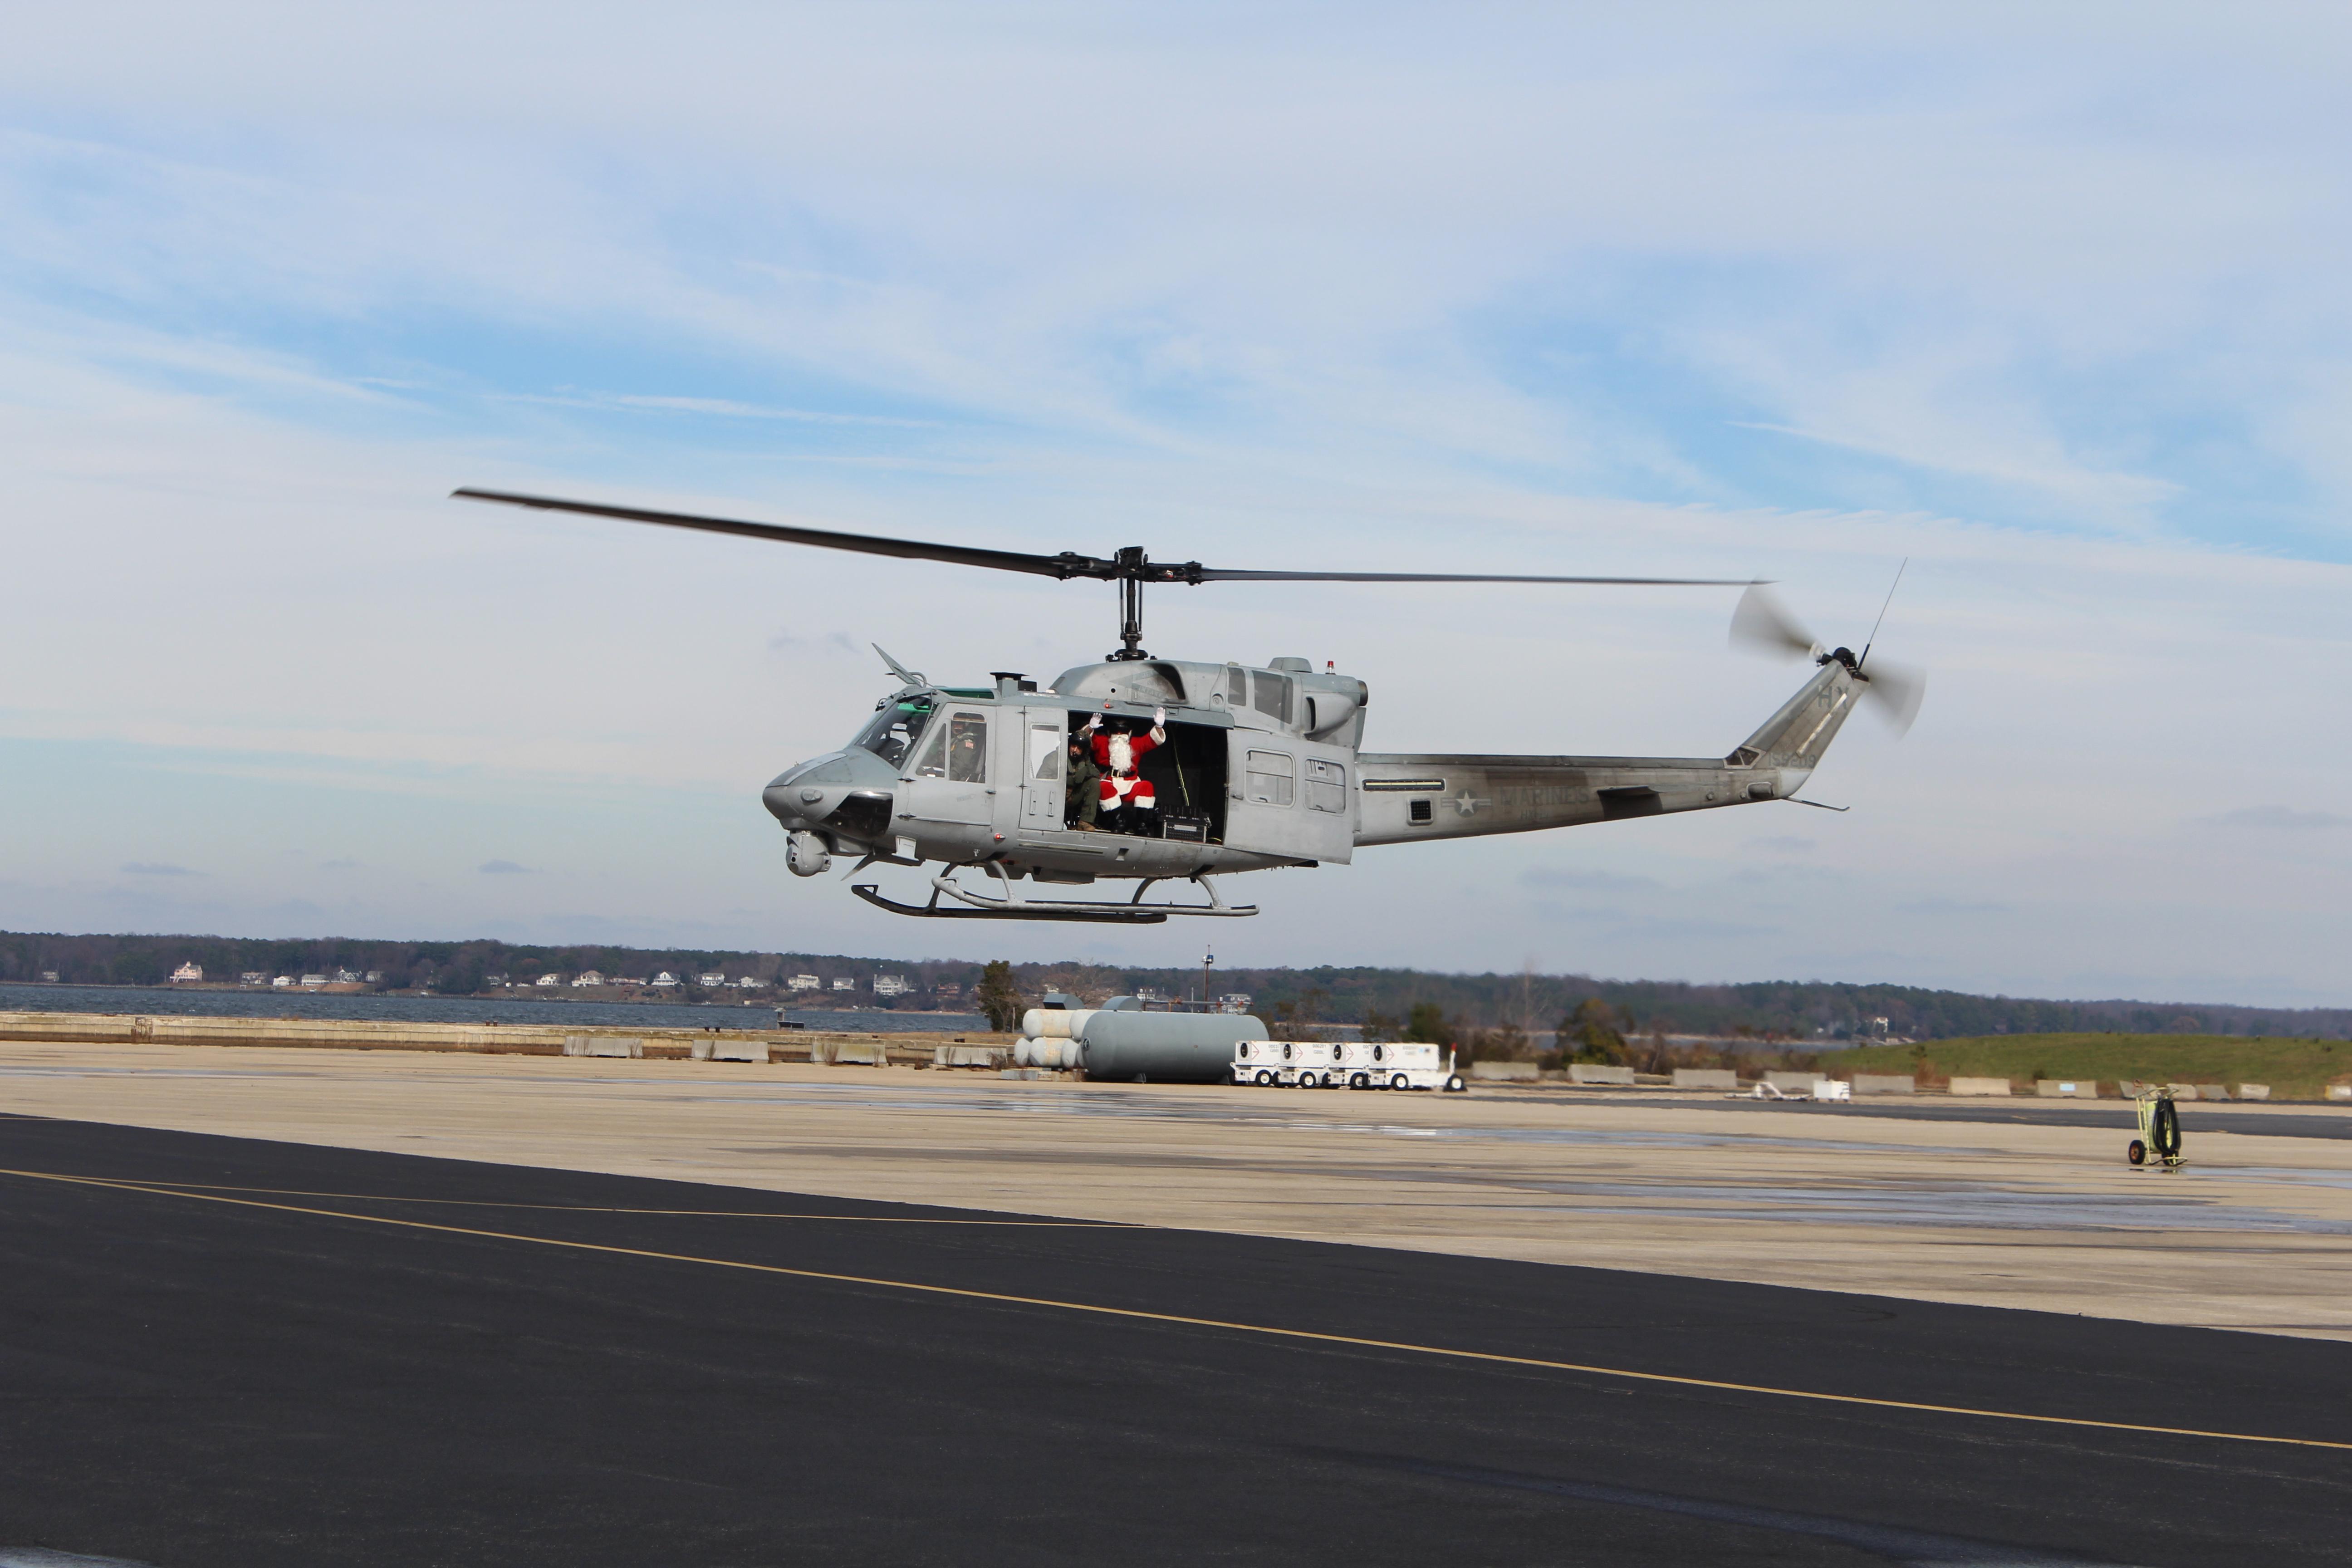 Adm. Claus waves from a helicopter near the Patuxent River in a red specialty flight suit.